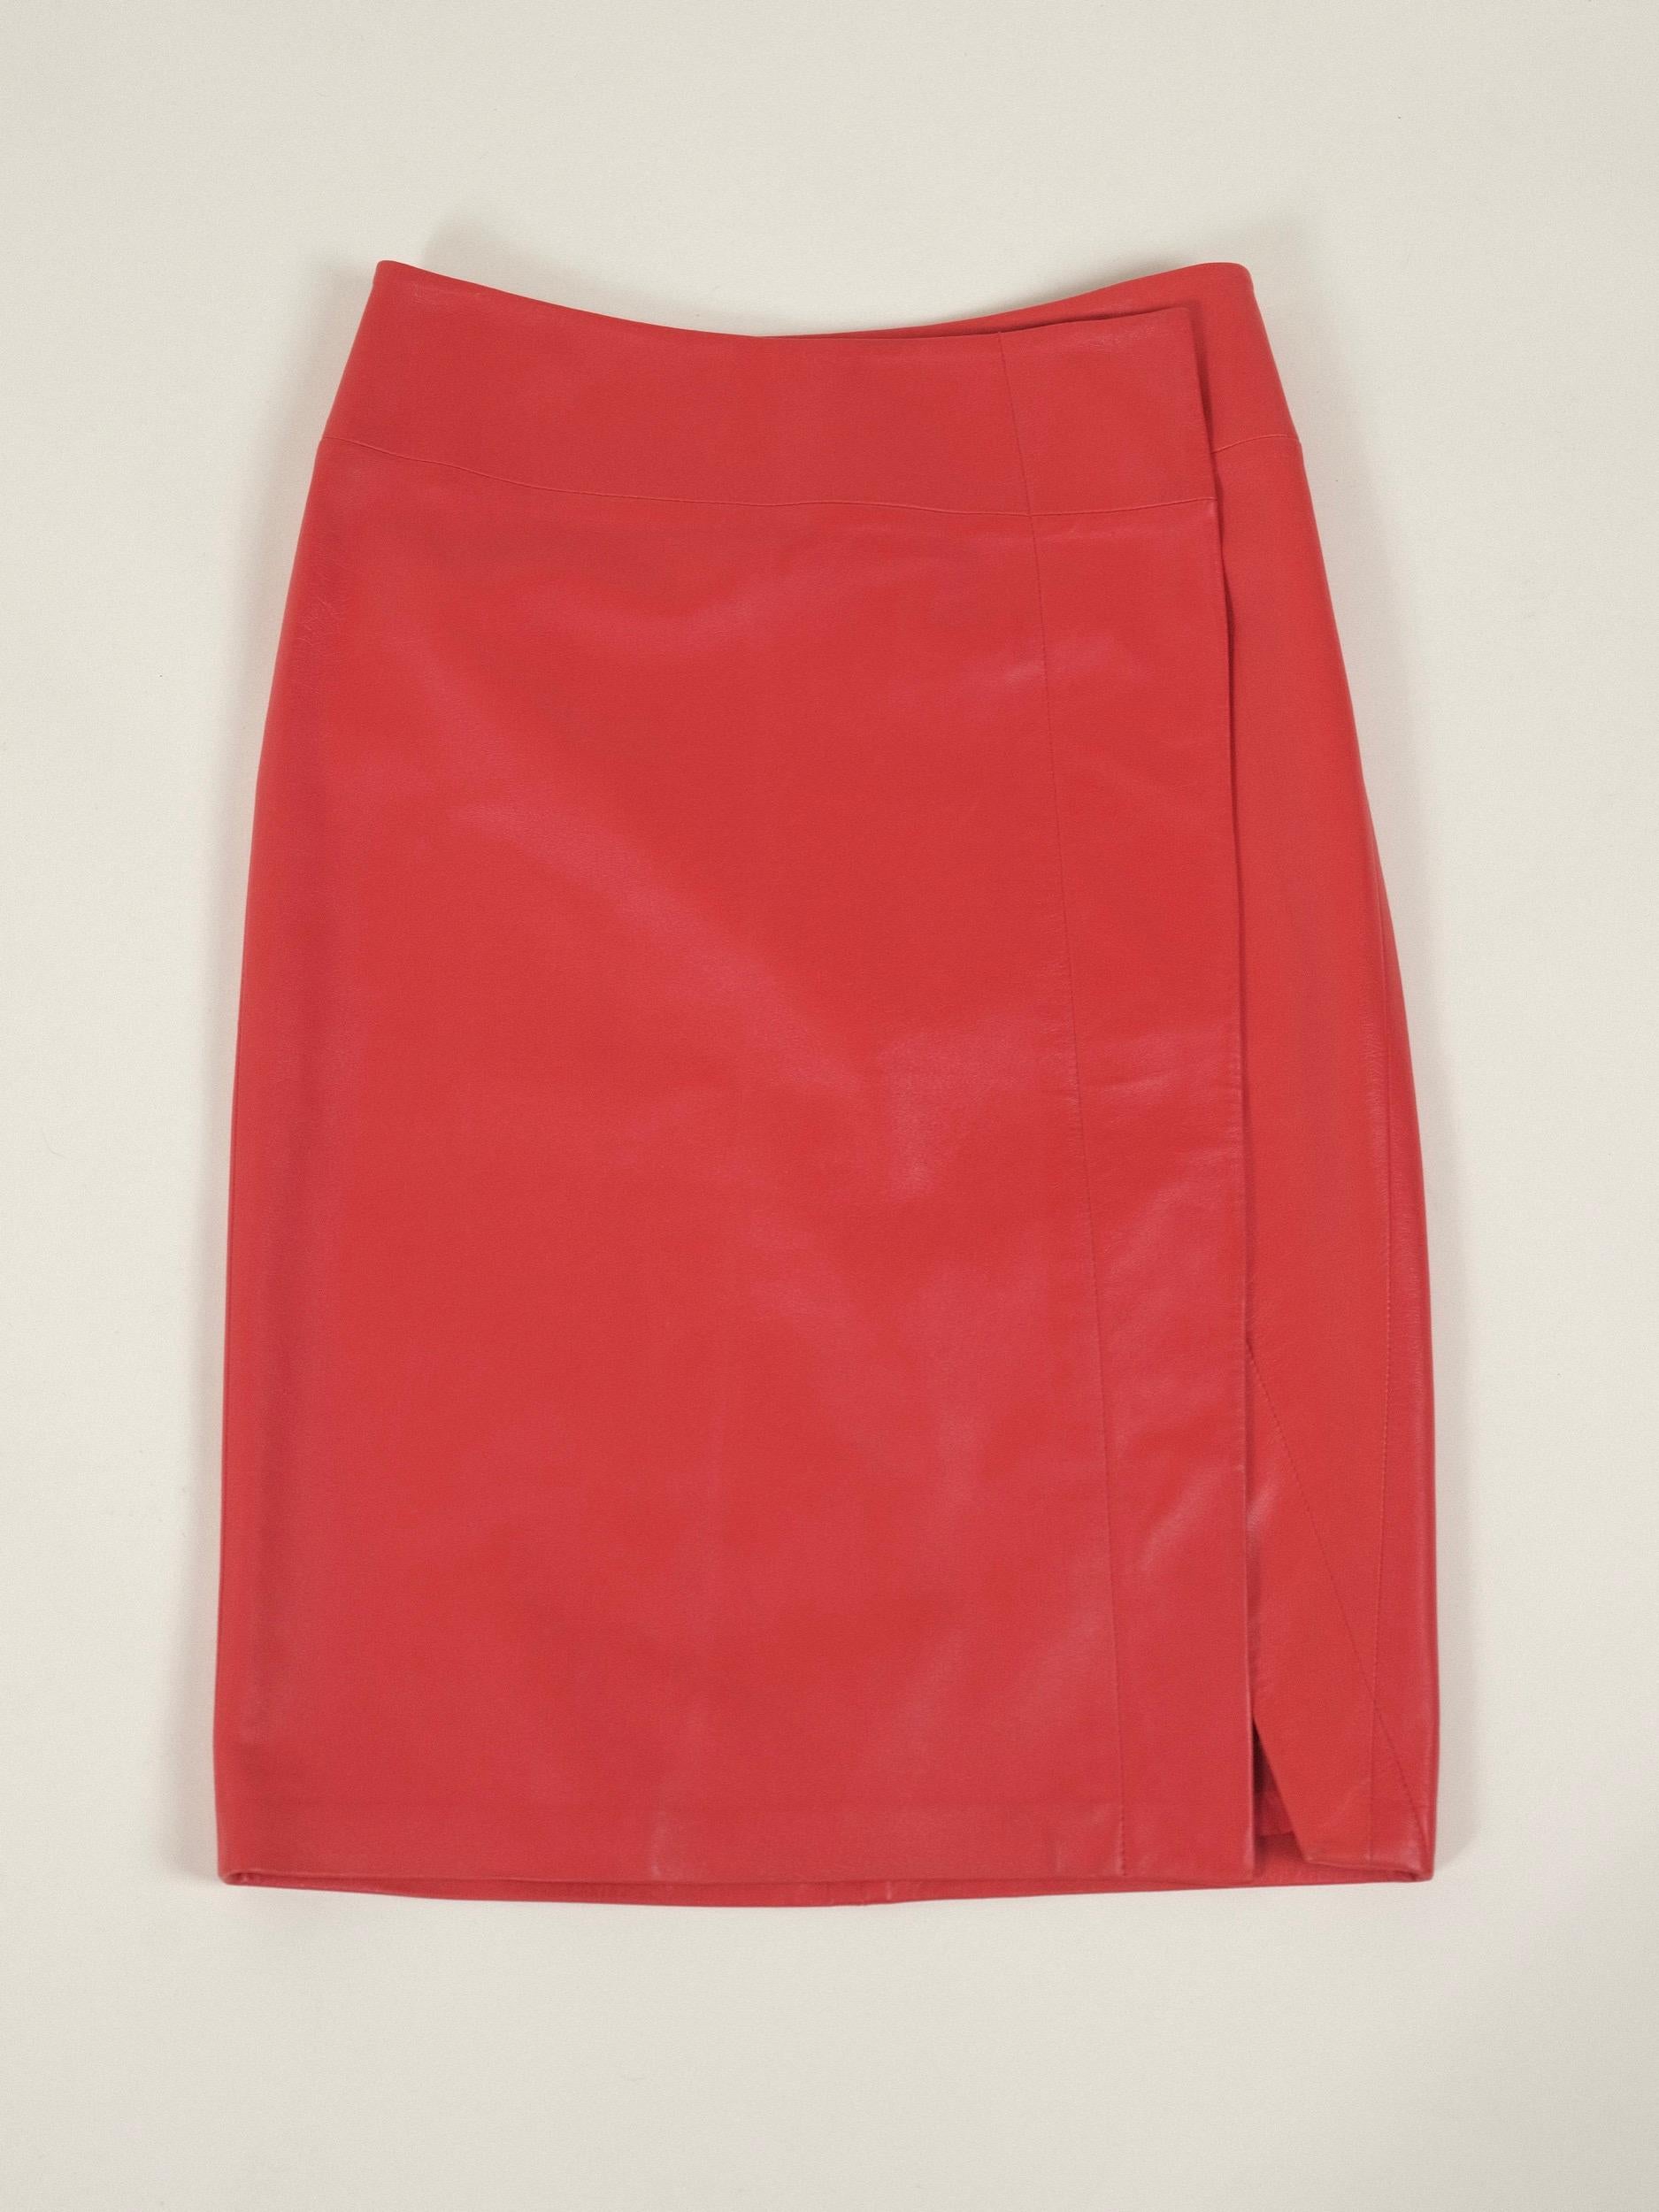 Donna Karan Leather Wrap Skirt Tomato Red Size US4 IT40 FR38 1990's For Sale 14